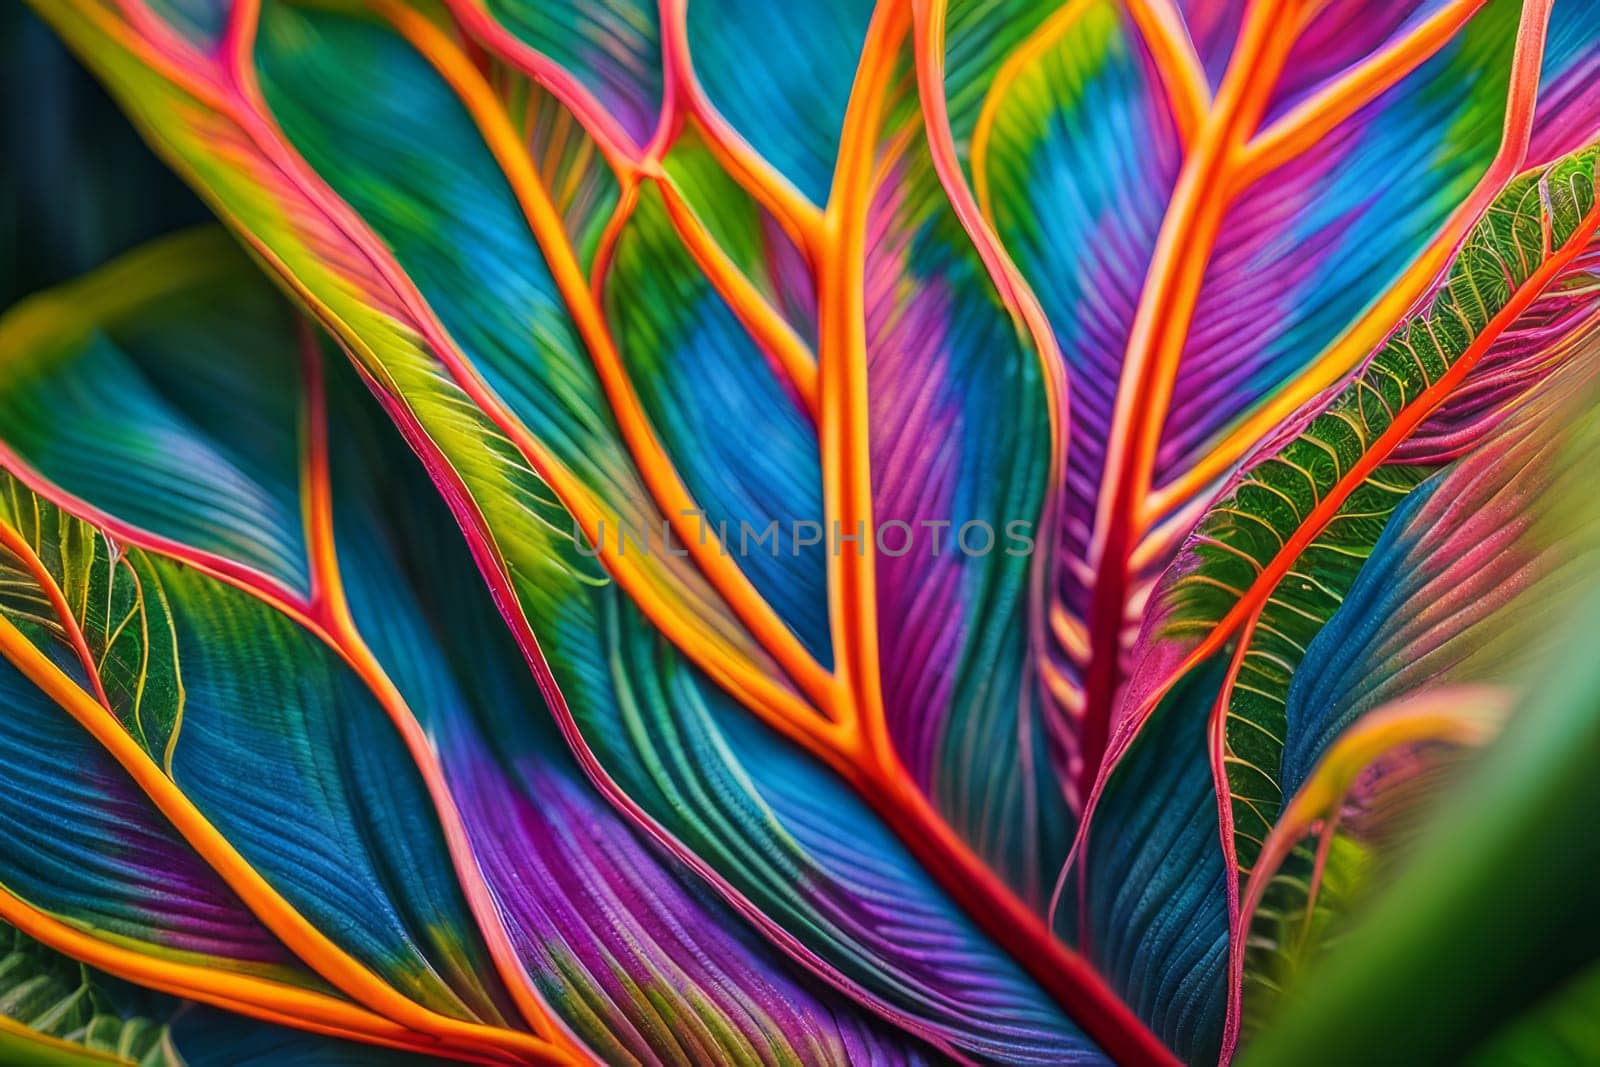 Tropical harmony captured in the vibrant hues of lush jungle leaves